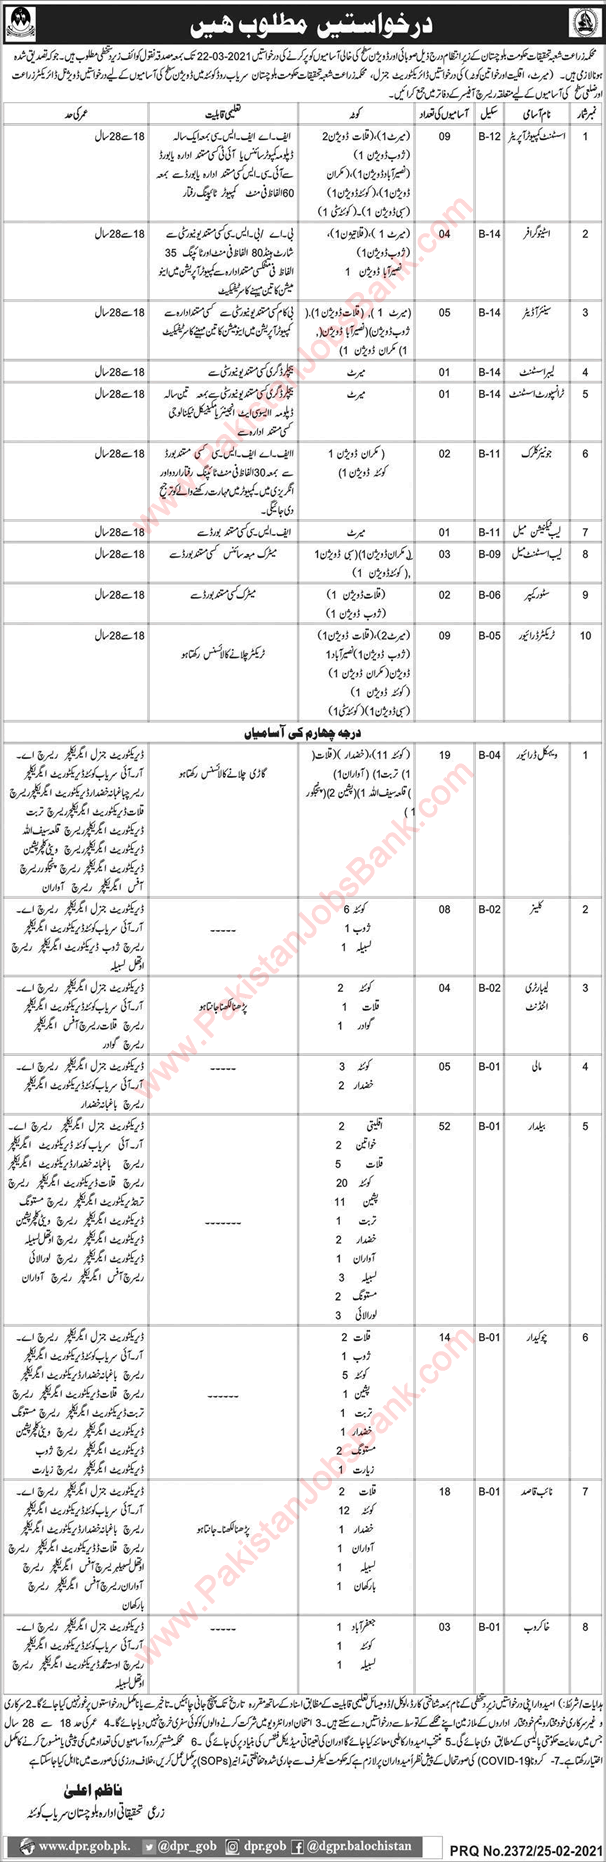 Agriculture Research Institute Balochistan Jobs 2021 February Baildar, Drivers, Naib Qasid & Others Latest